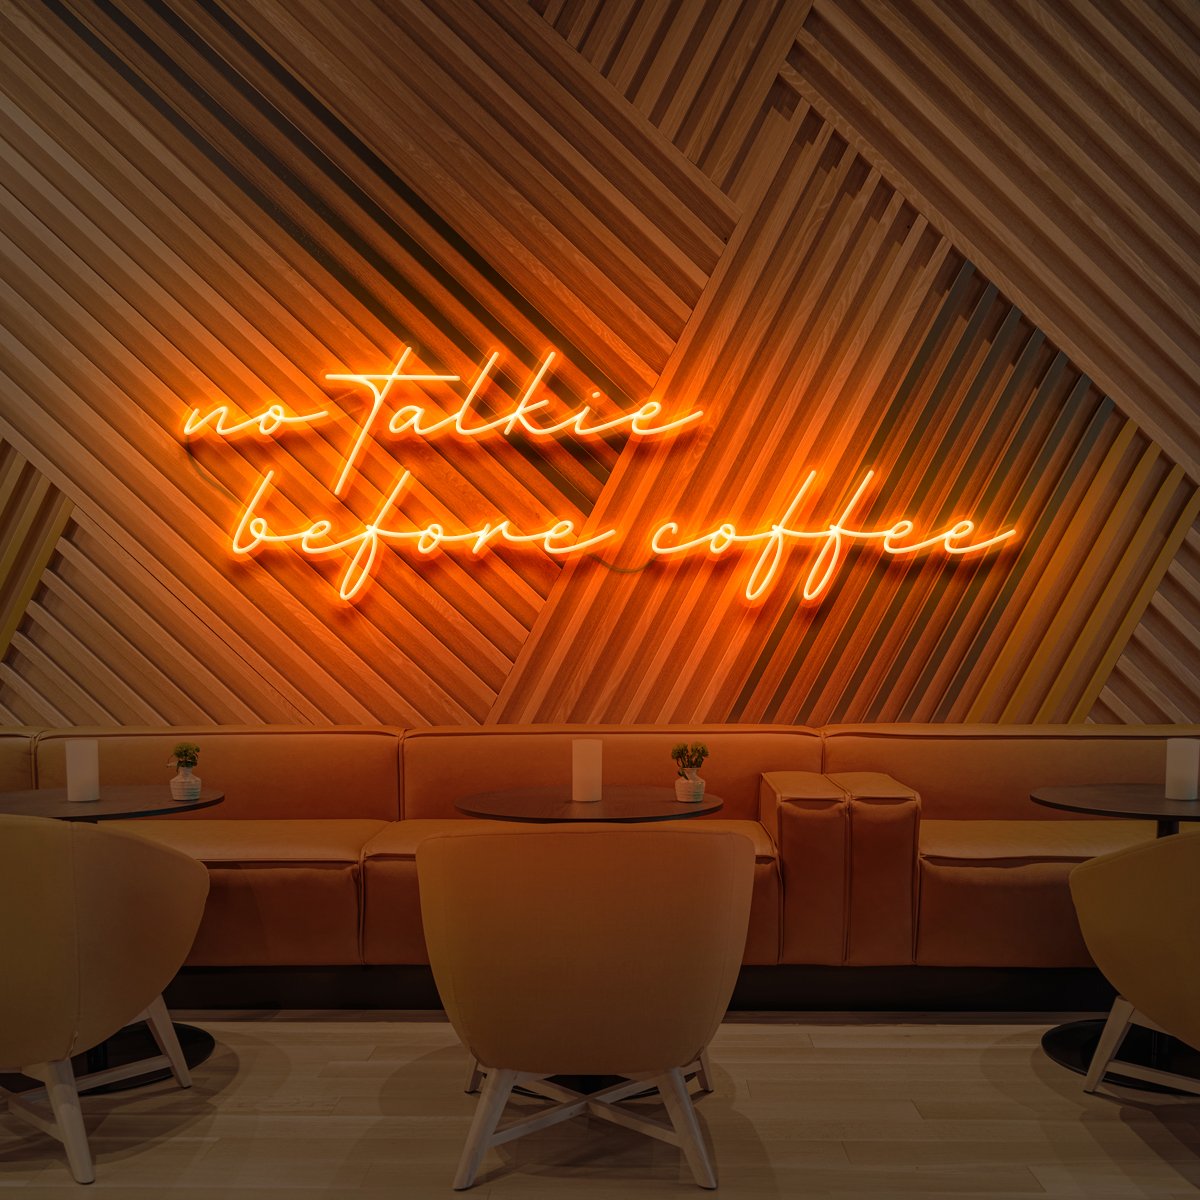 "No Talkie Before Coffee" Neon Sign for Cafés 90cm (3ft) / Orange / LED Neon by Neon Icons